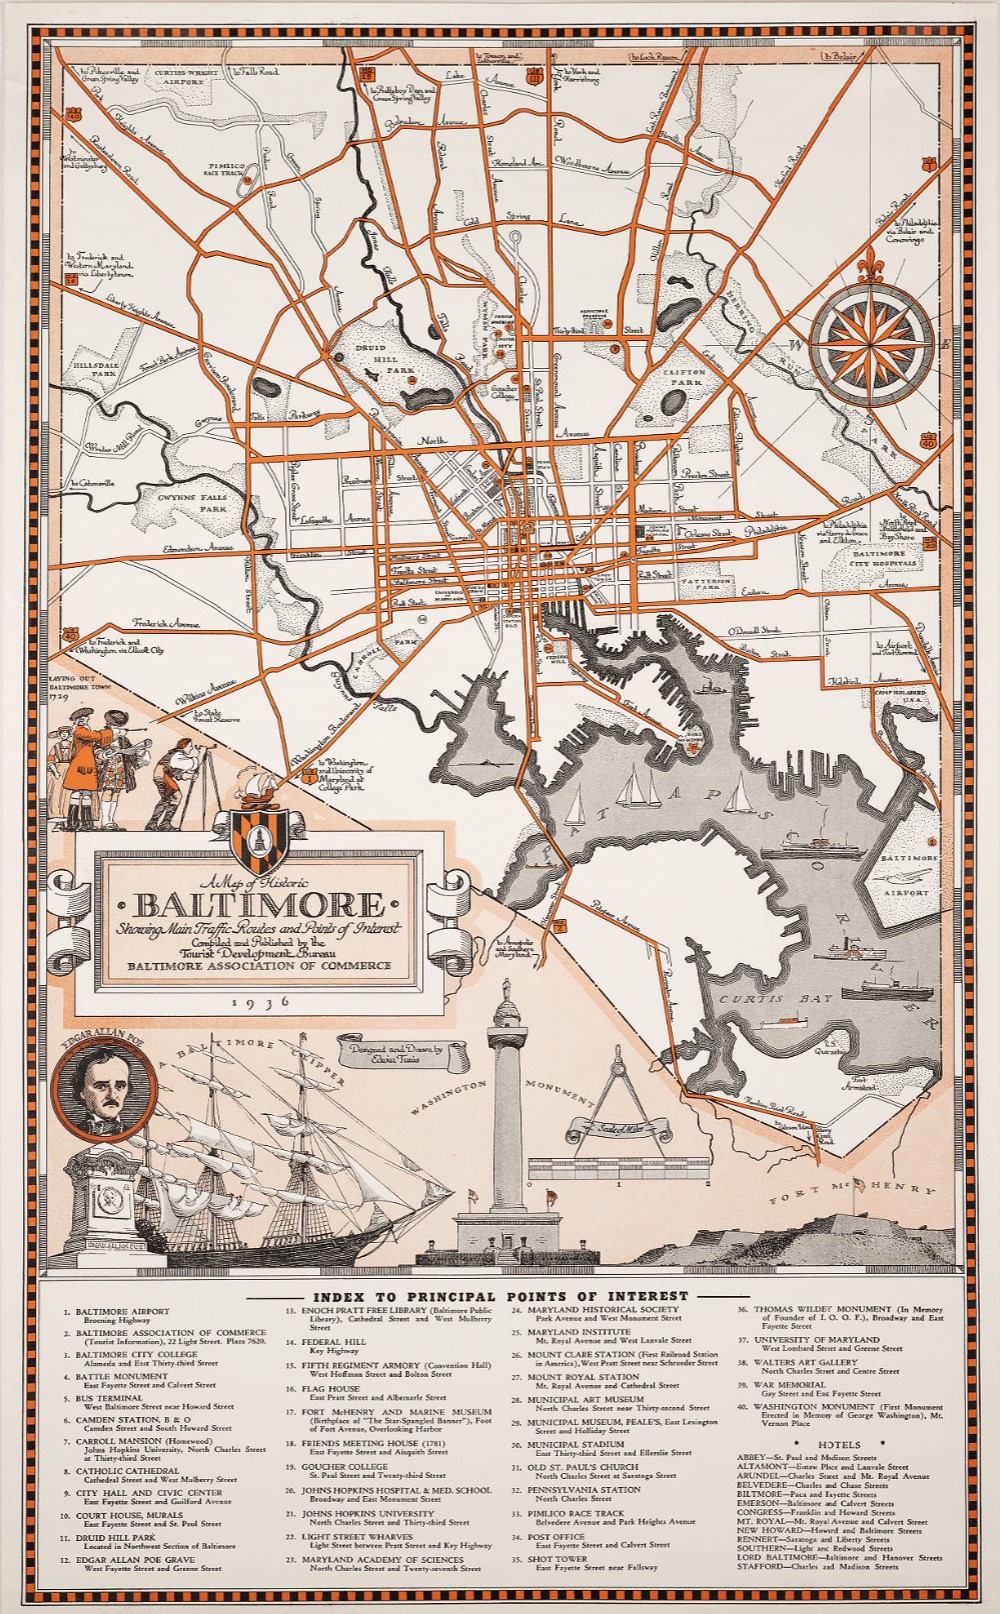 1936 - A map of historic Baltimore showing main traffic routes and points of interest